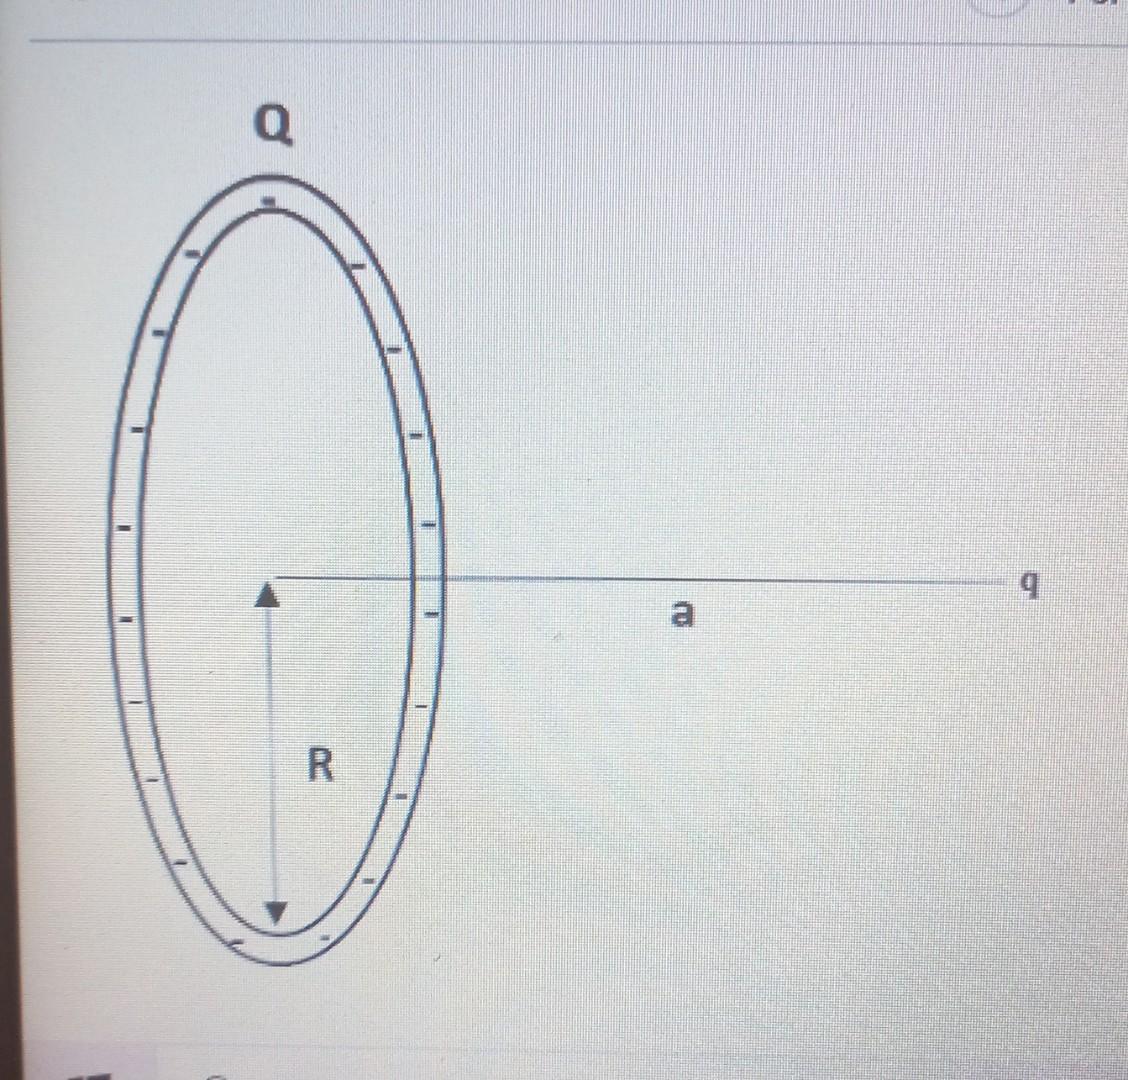 23-33) A thin circular ring of radius R (as in Fig. 23-14) has charge +Q/2  uniformly distributed on - YouTube